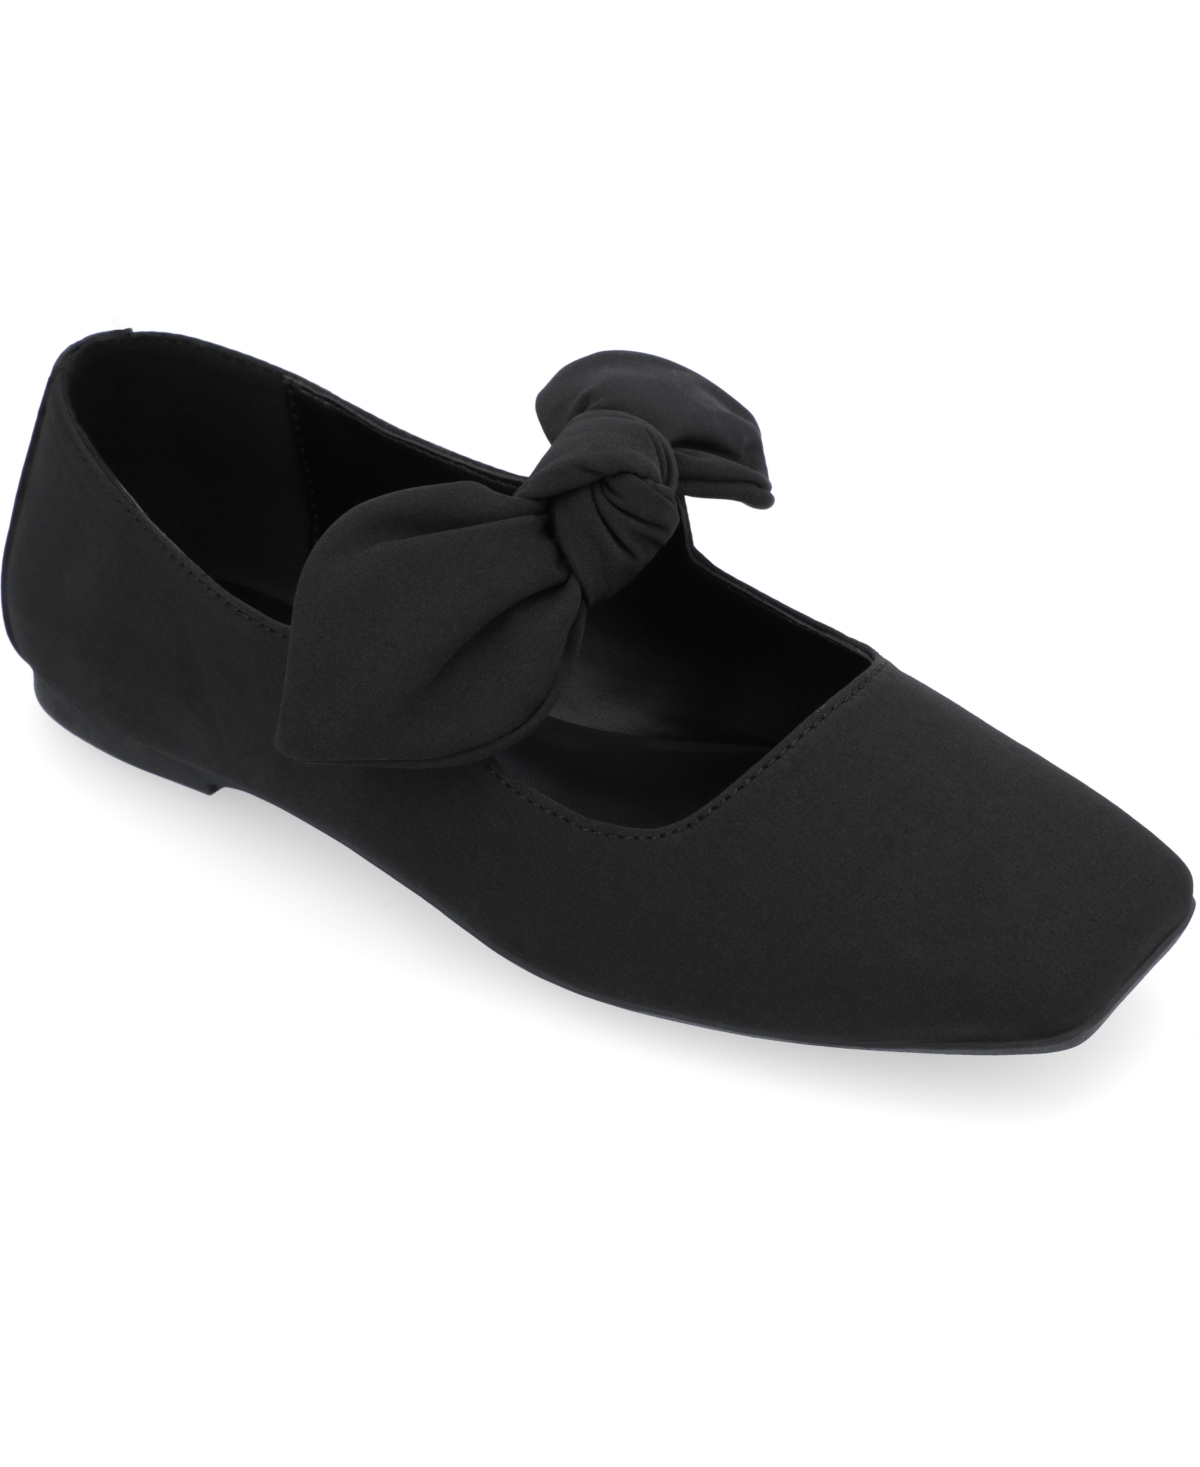 Vintage Shoes in Pictures | Shop Vintage Style Shoes Journee Collection Womens Seralinn Bow Flats - Black $56.24 AT vintagedancer.com